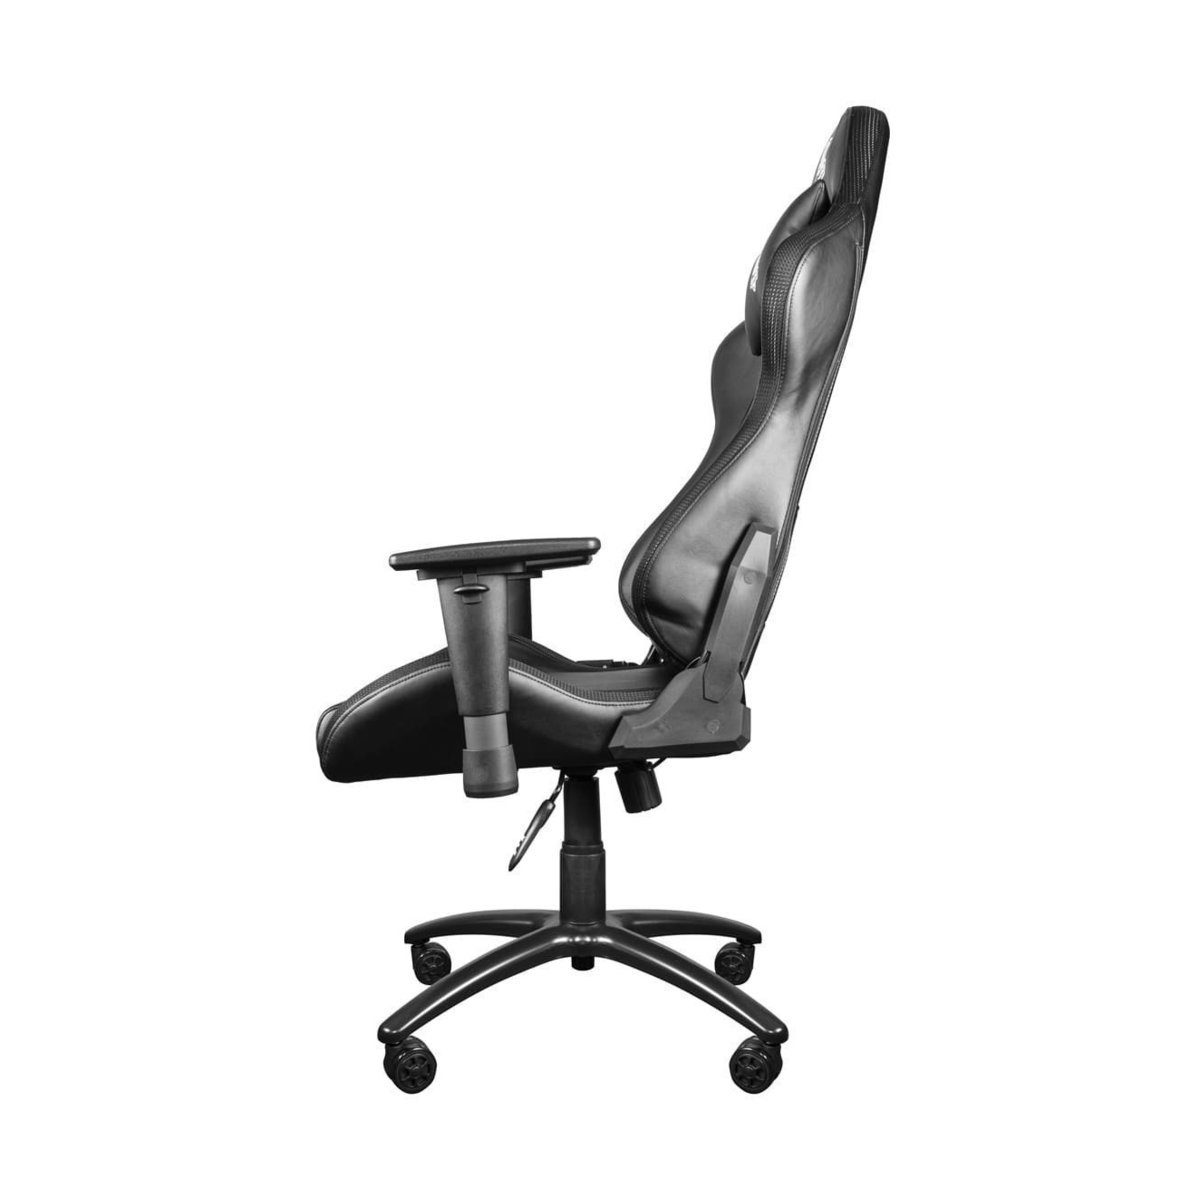 Pro Gaming ONE Chair Gaming GAMING RGB ONE Stuhl Chair GAMING